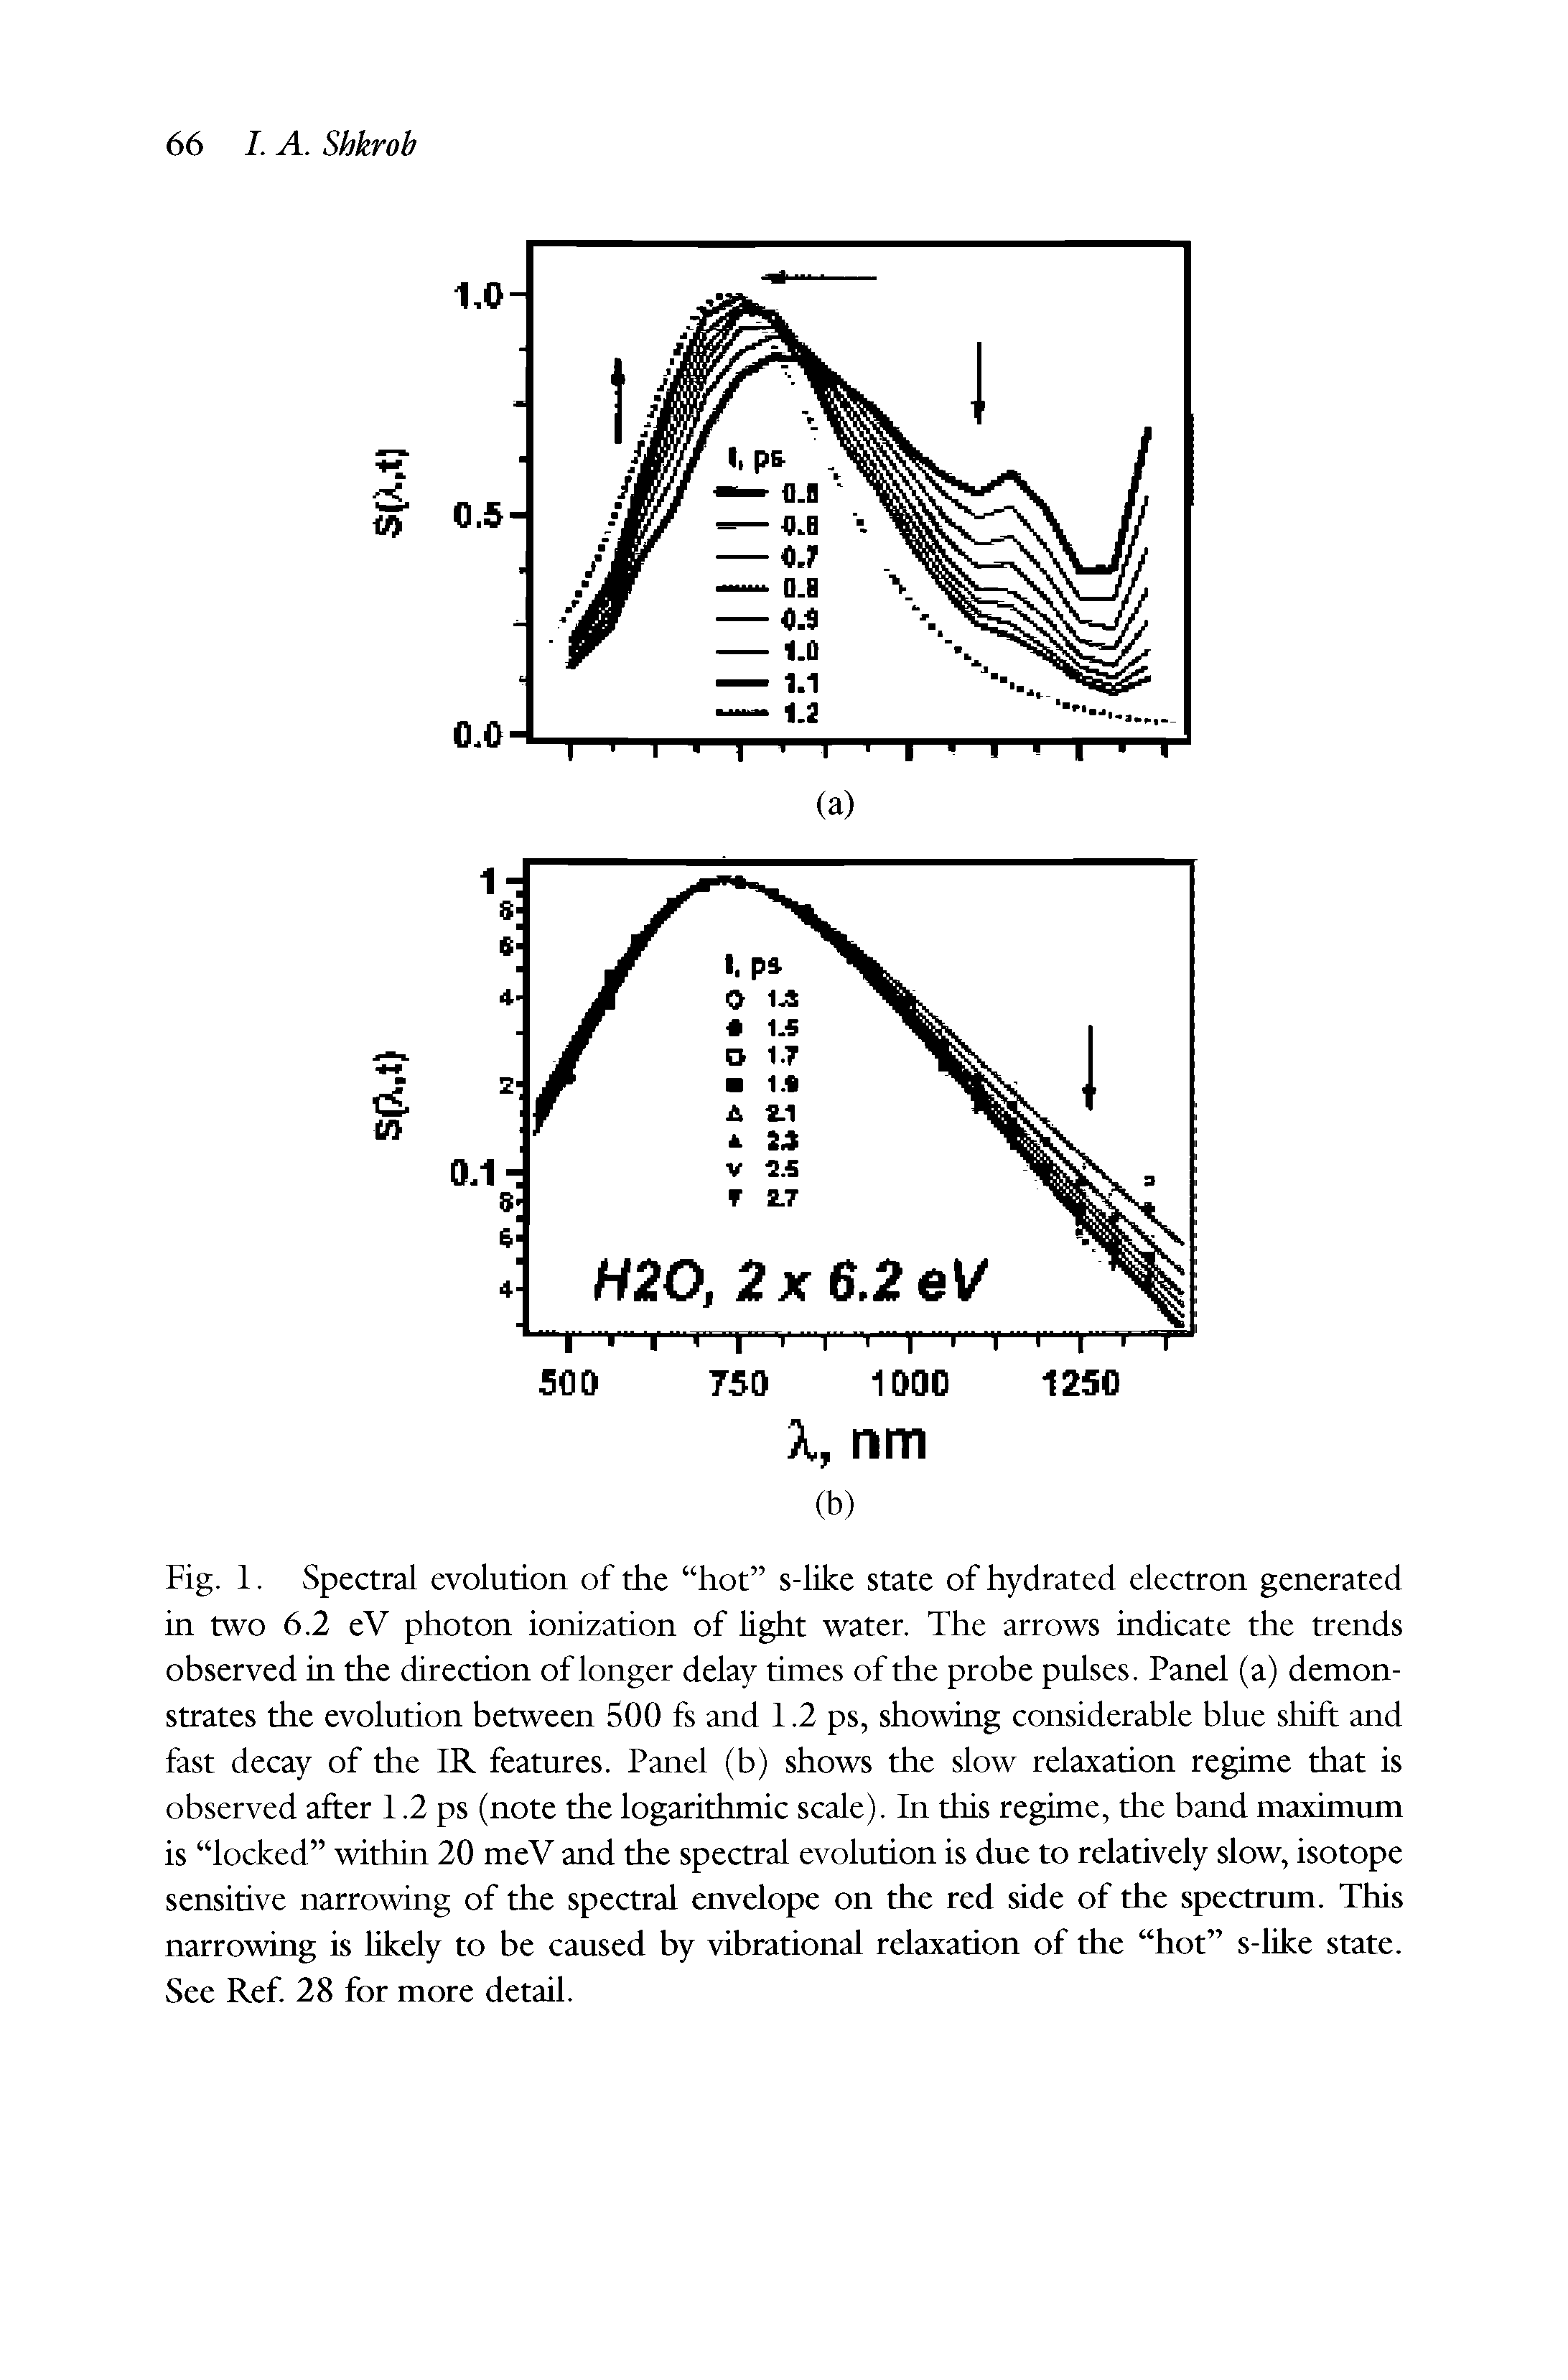 Fig. 1. Spectral evolution of the hot s-like state of hydrated electron generated in two 6.2 eV photon ionization of light water. The arrows indicate the trends observed in the direction of longer delay times of the probe pulses. Panel (a) demonstrates the evolution between 500 fs and 1.2 ps, showing considerable blue shift and fast decay of the IR features. Panel (b) shows the slow relaxation regime that is observed after 1.2 ps (note the logarithmic scale). In this regime, the band maximum is locked within 20 meV and the spectral evolution is due to relatively slow, isotope sensitive narrowing of the spectral envelope on the red side of the spectrum. This narrowing is likely to be caused by vibrational relaxation of the hot s-like state. See Ref 28 for more detail.